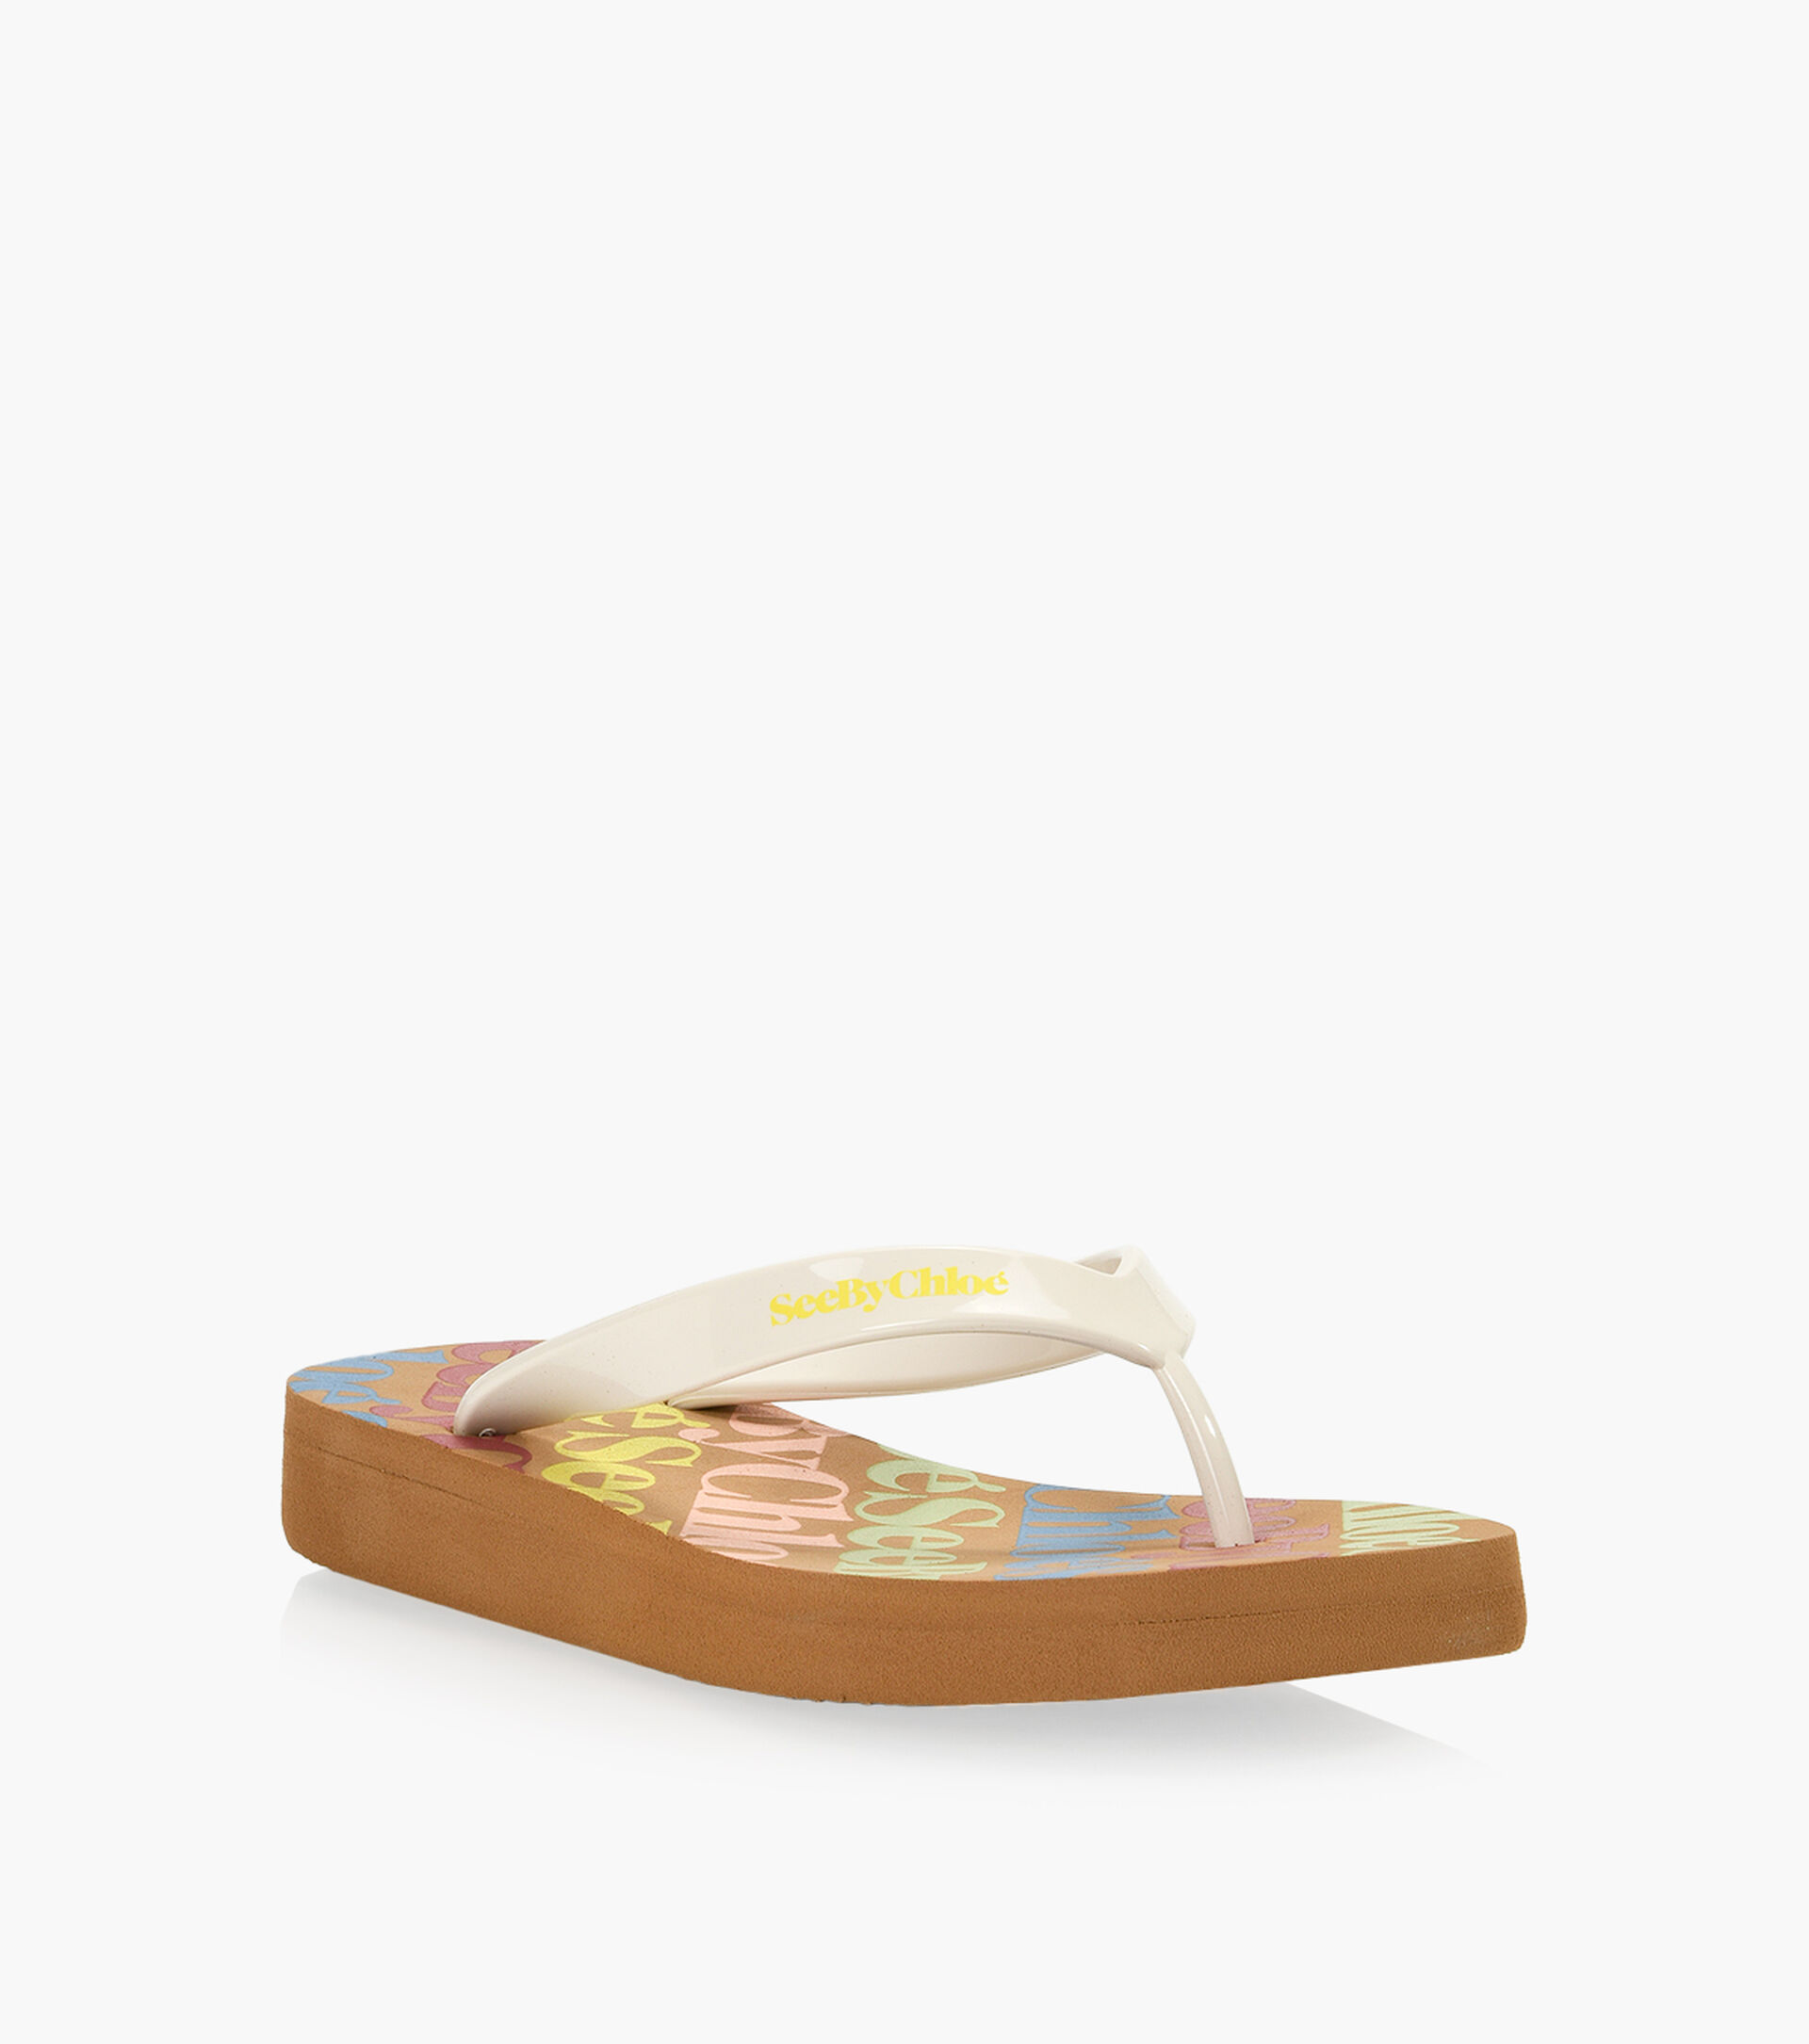 SEE BY CHLOE ESSIE - Caoutchouc Beige | Browns Shoes